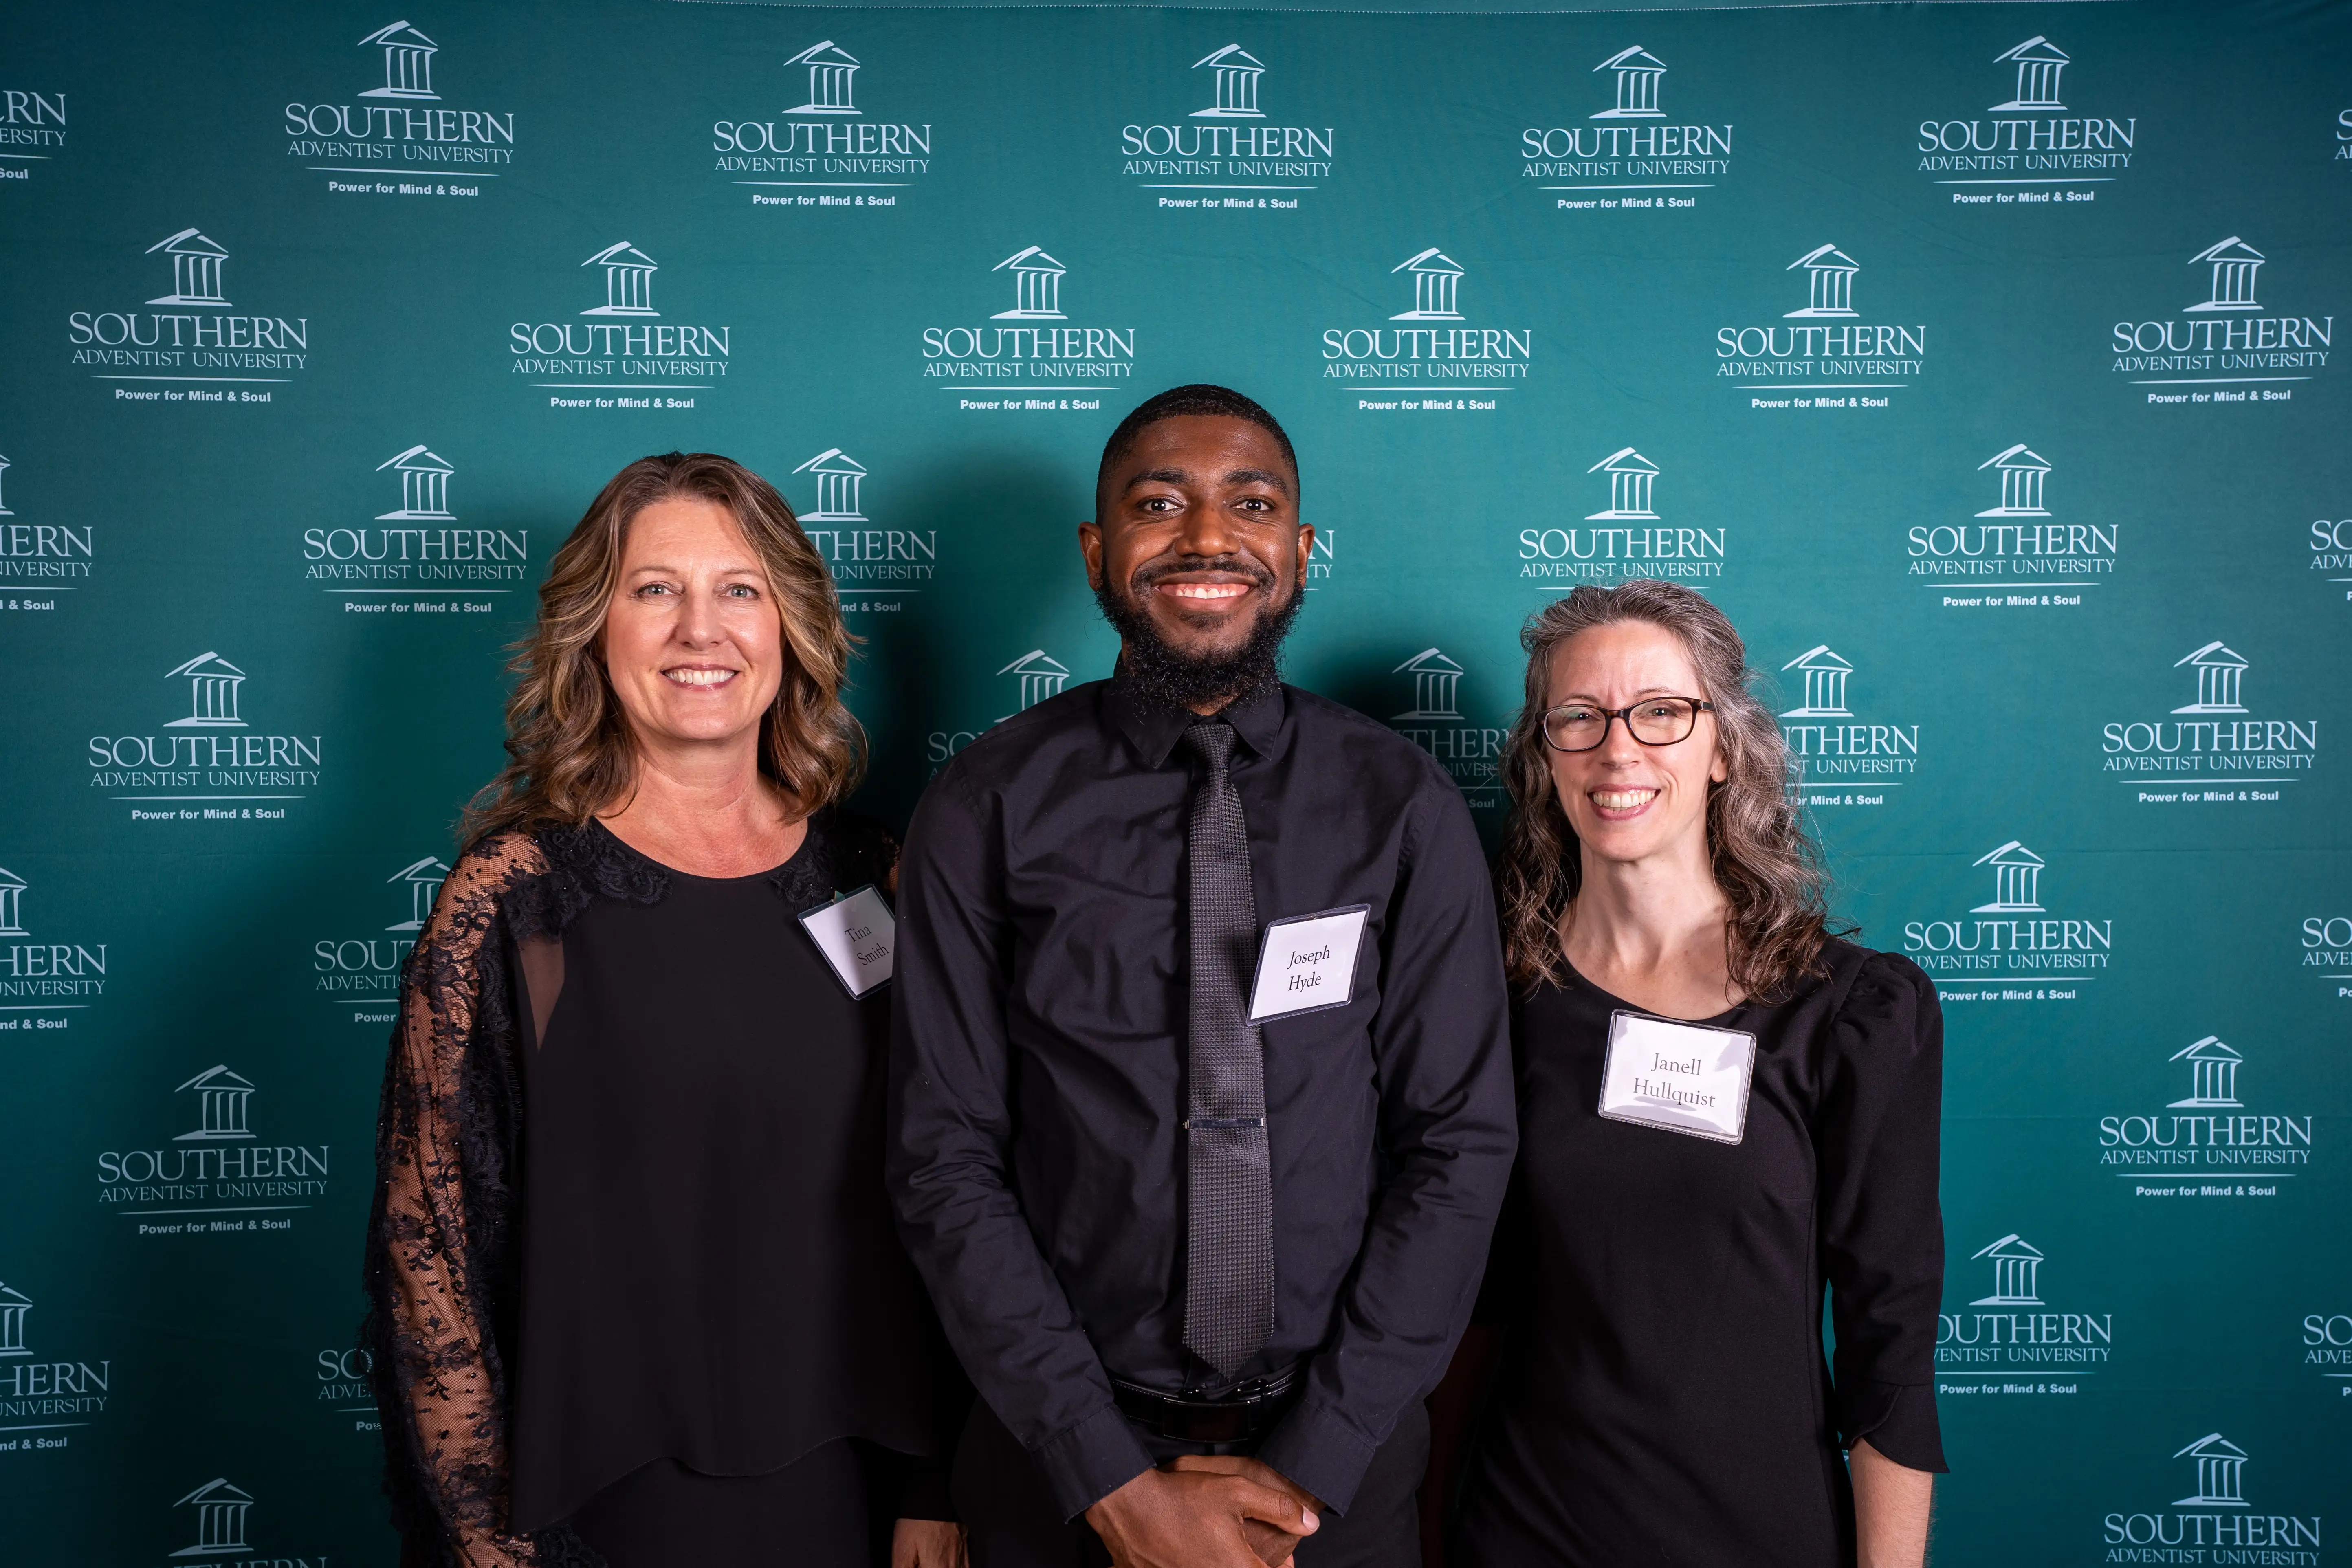 Tina Smith, '89, Joseph Hyde, '20, and Janell Hullquist, '05